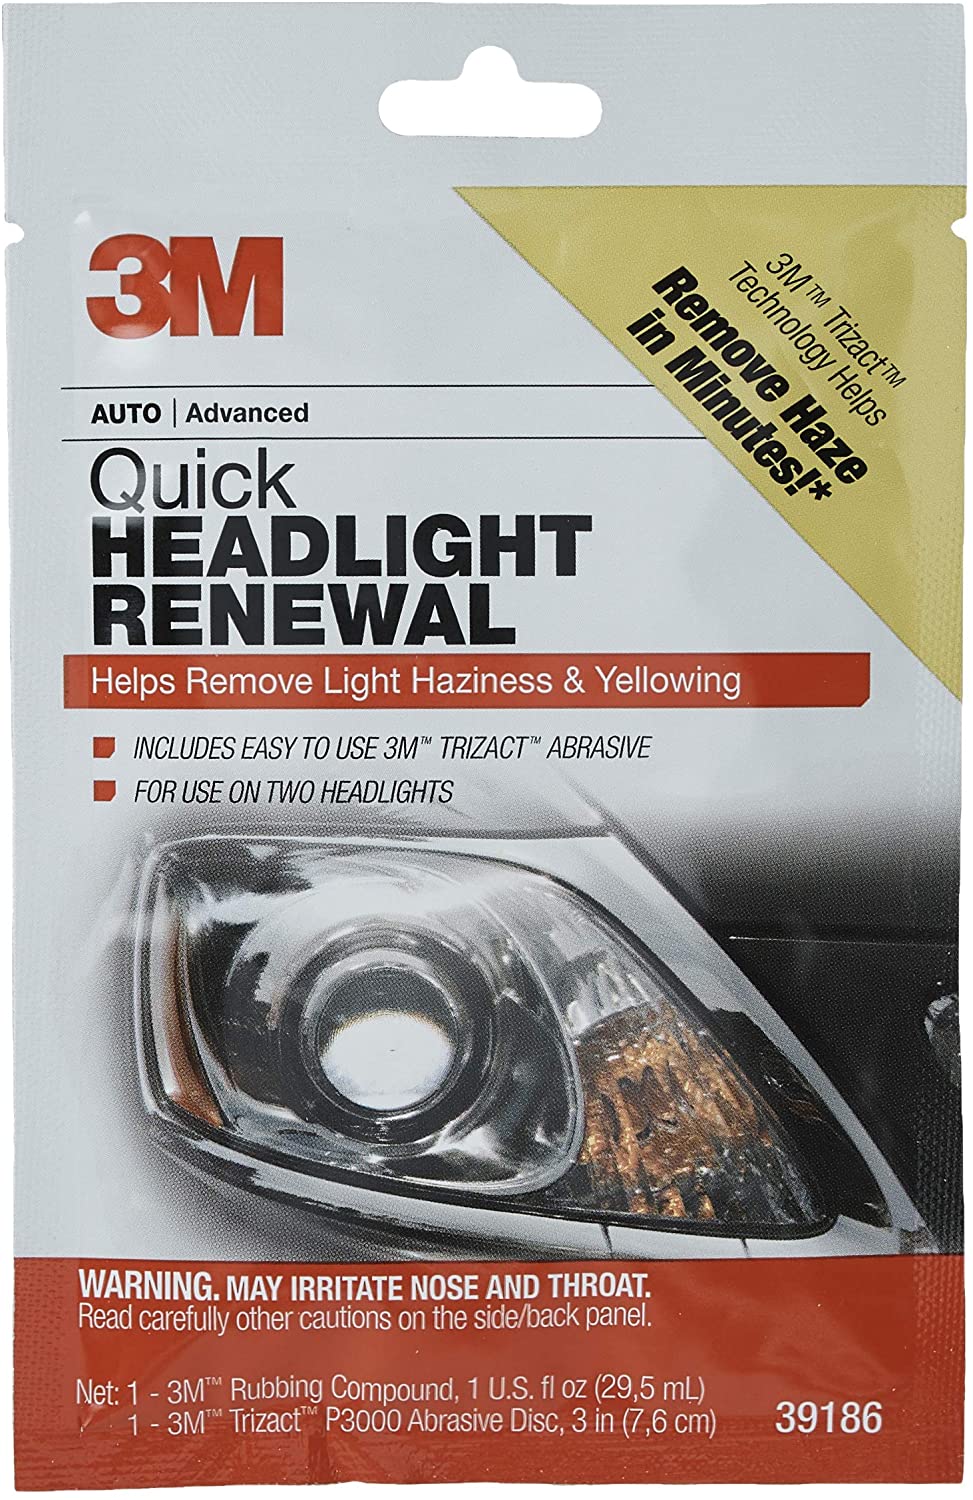 3M Quick Headlight Renewal, Helps Remove Light Haziness and Yellowing in Minutes, Hand Application, 1 Sachet